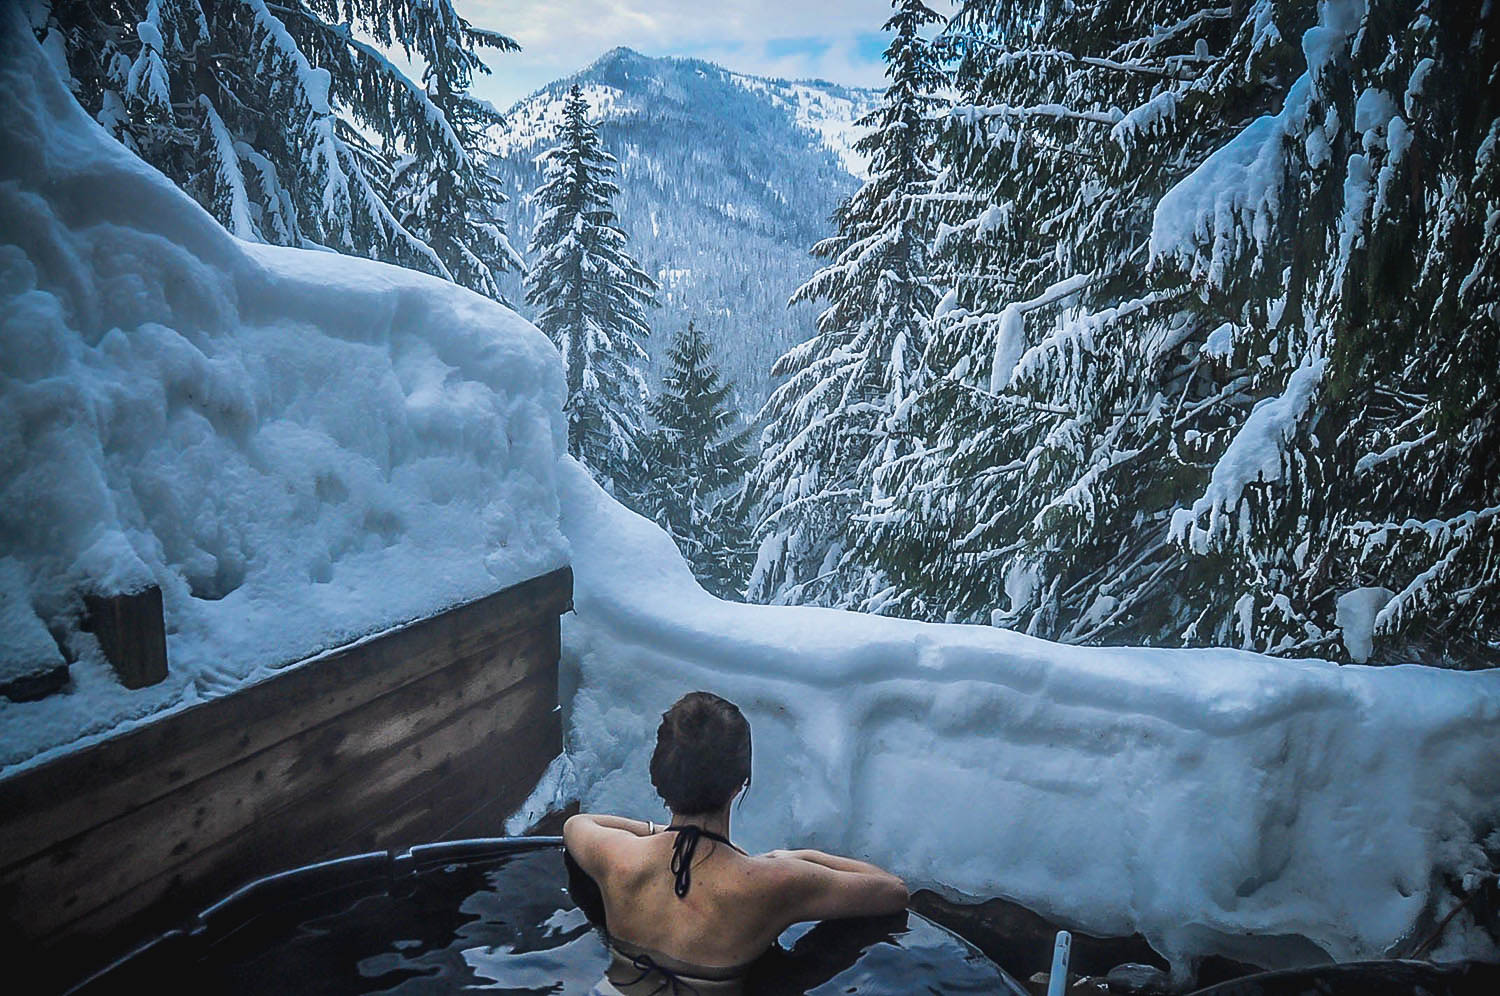 Hot Springs things to do in Washington State